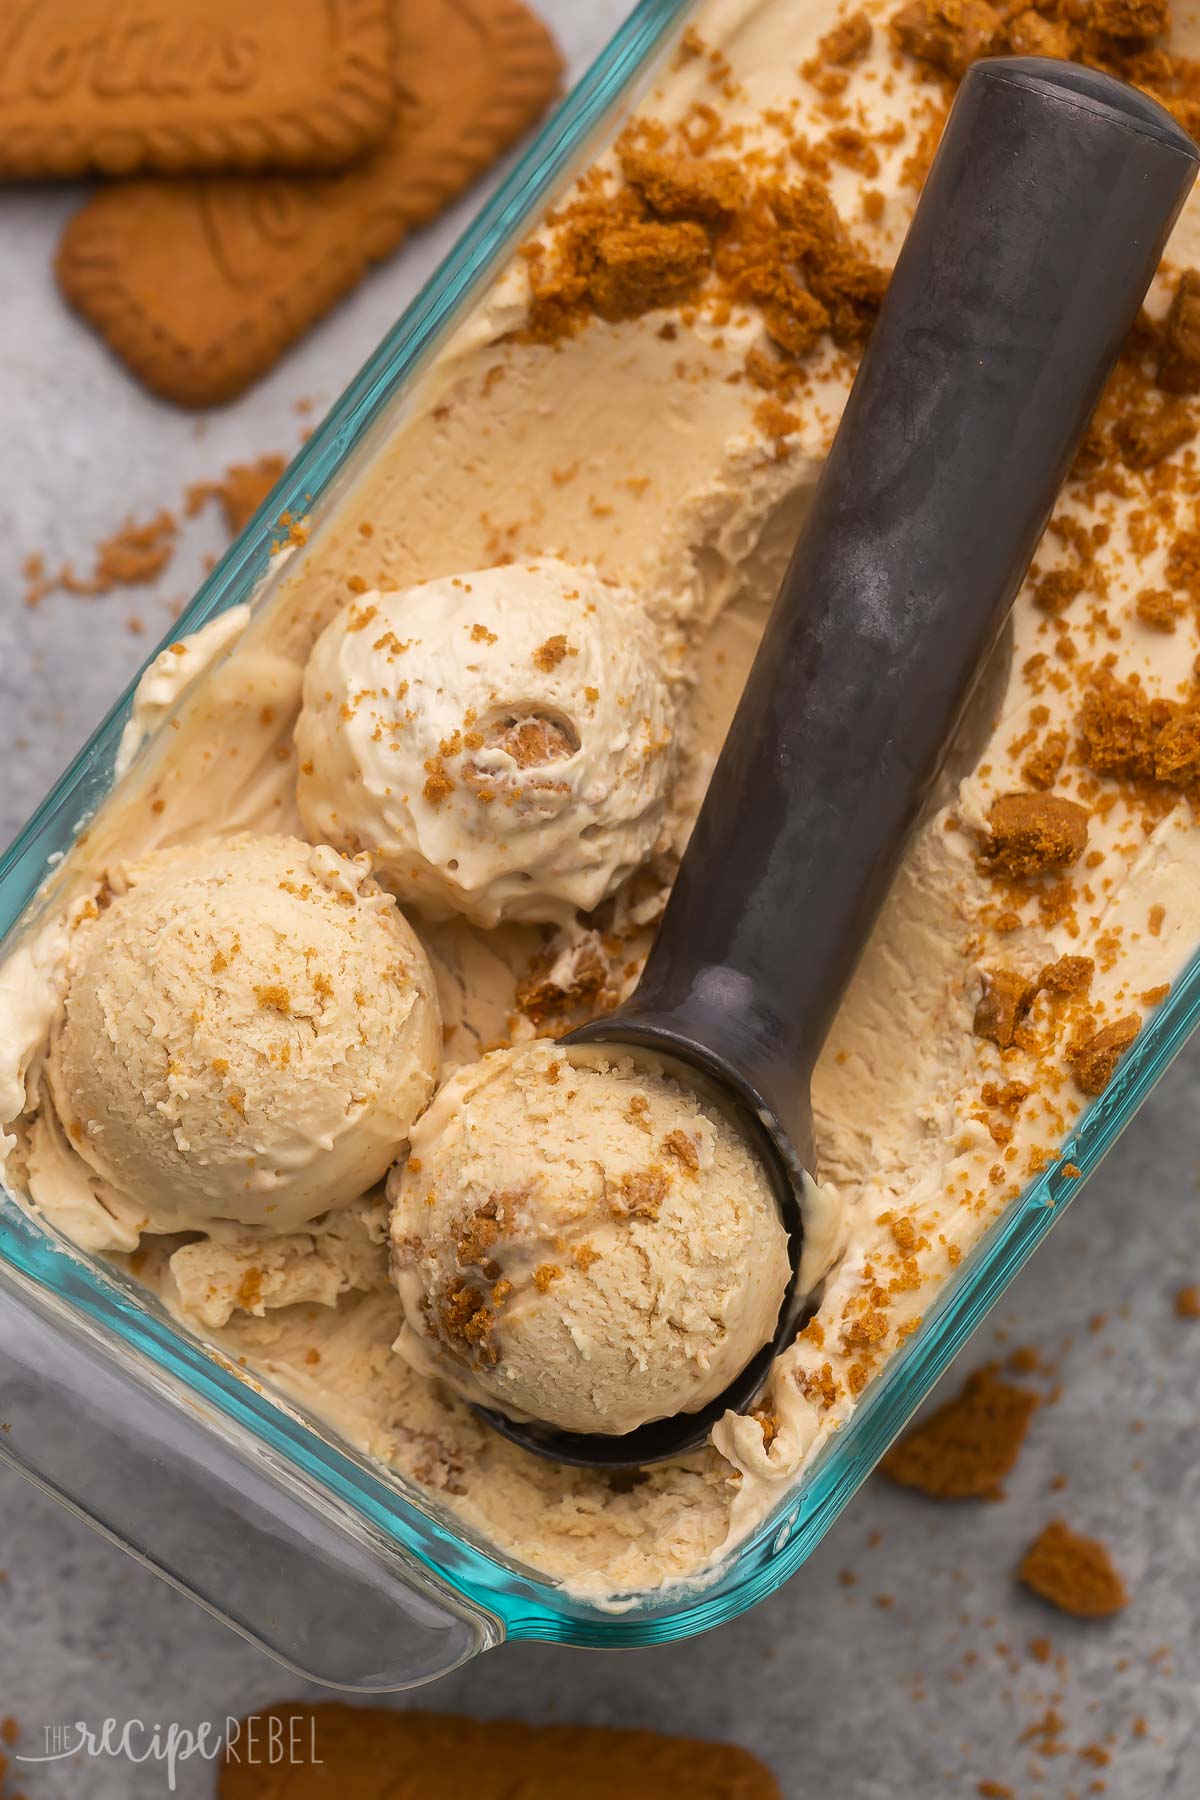 Top view of no churn Biscoff ice cream in a glass dish with an ice cream scoop in it. 